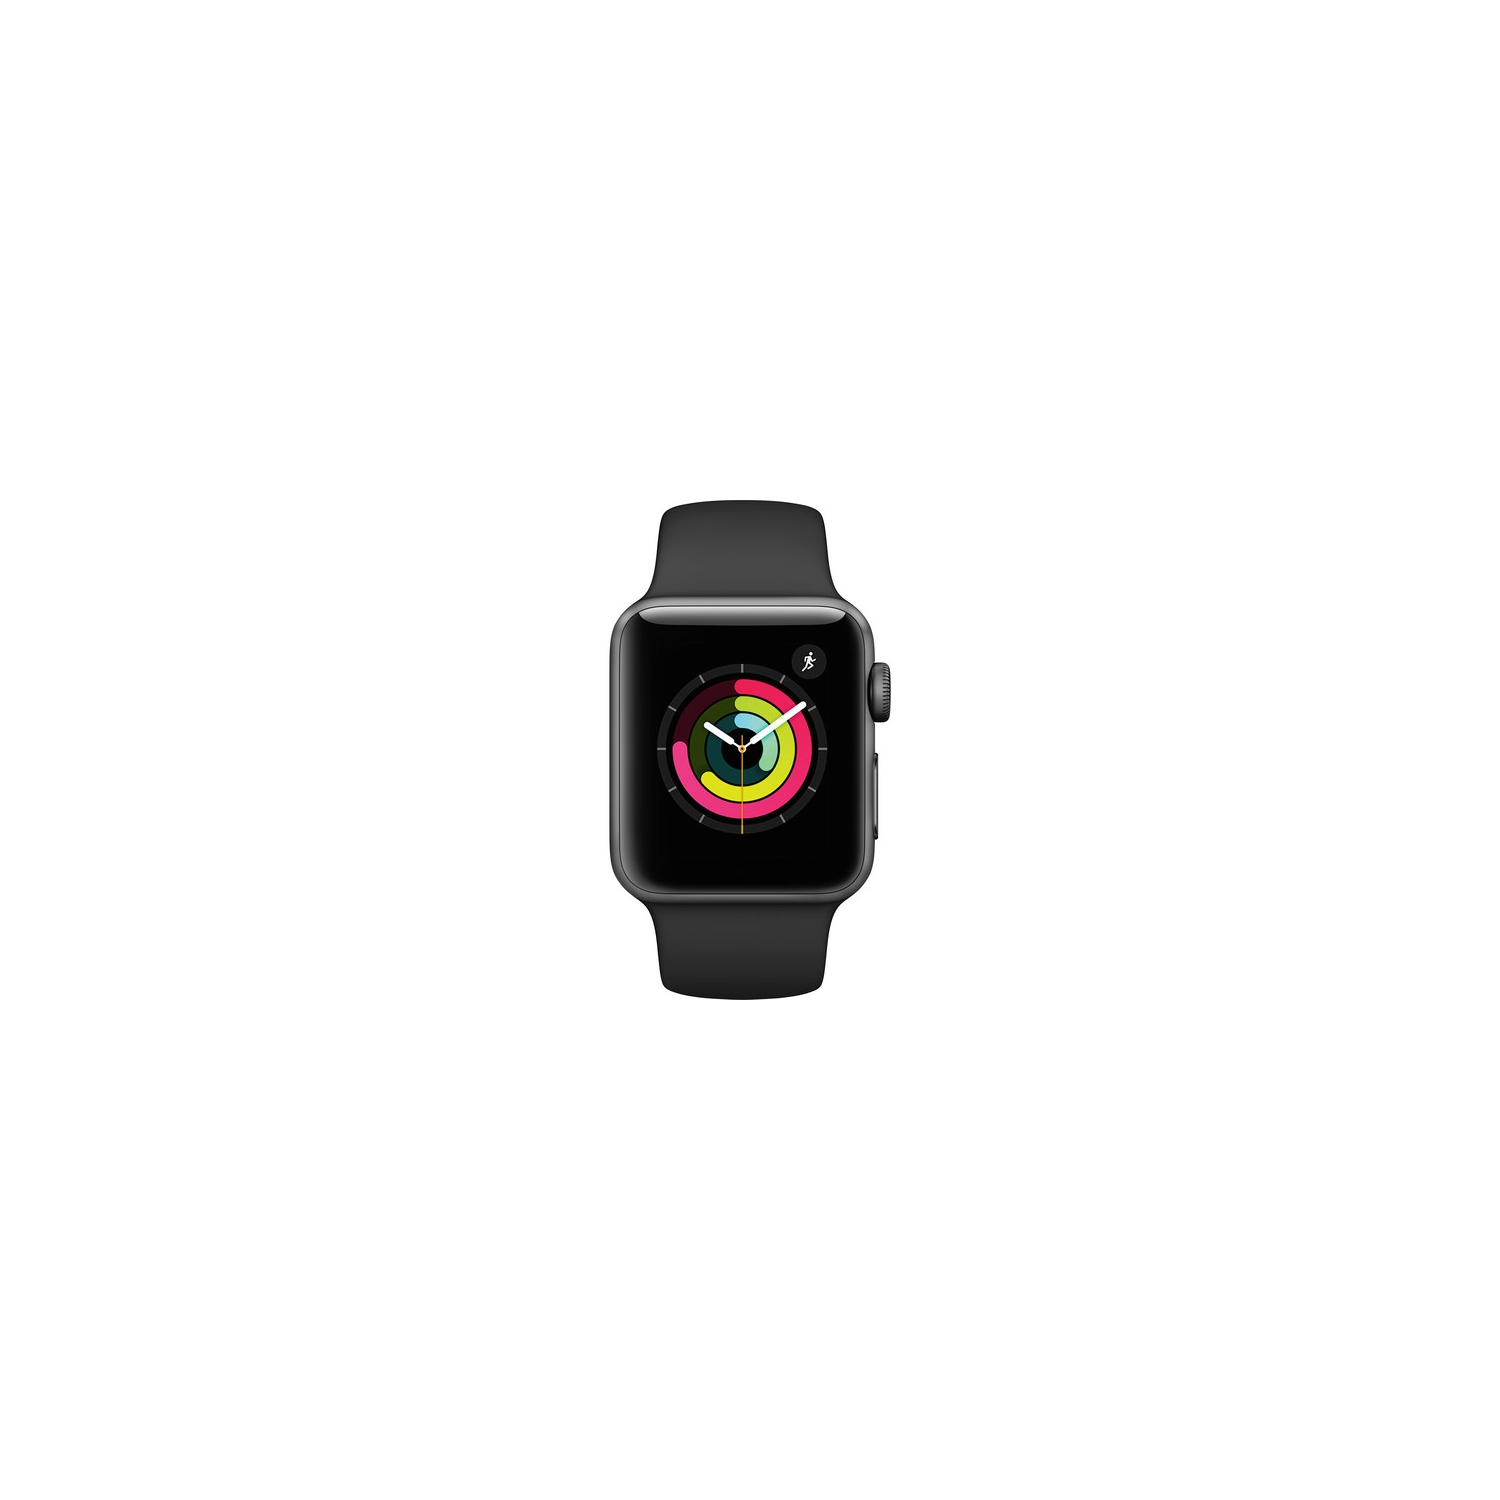 Apple Watch Series 3 38mm - GPS Only Space Gray Aluminum Case